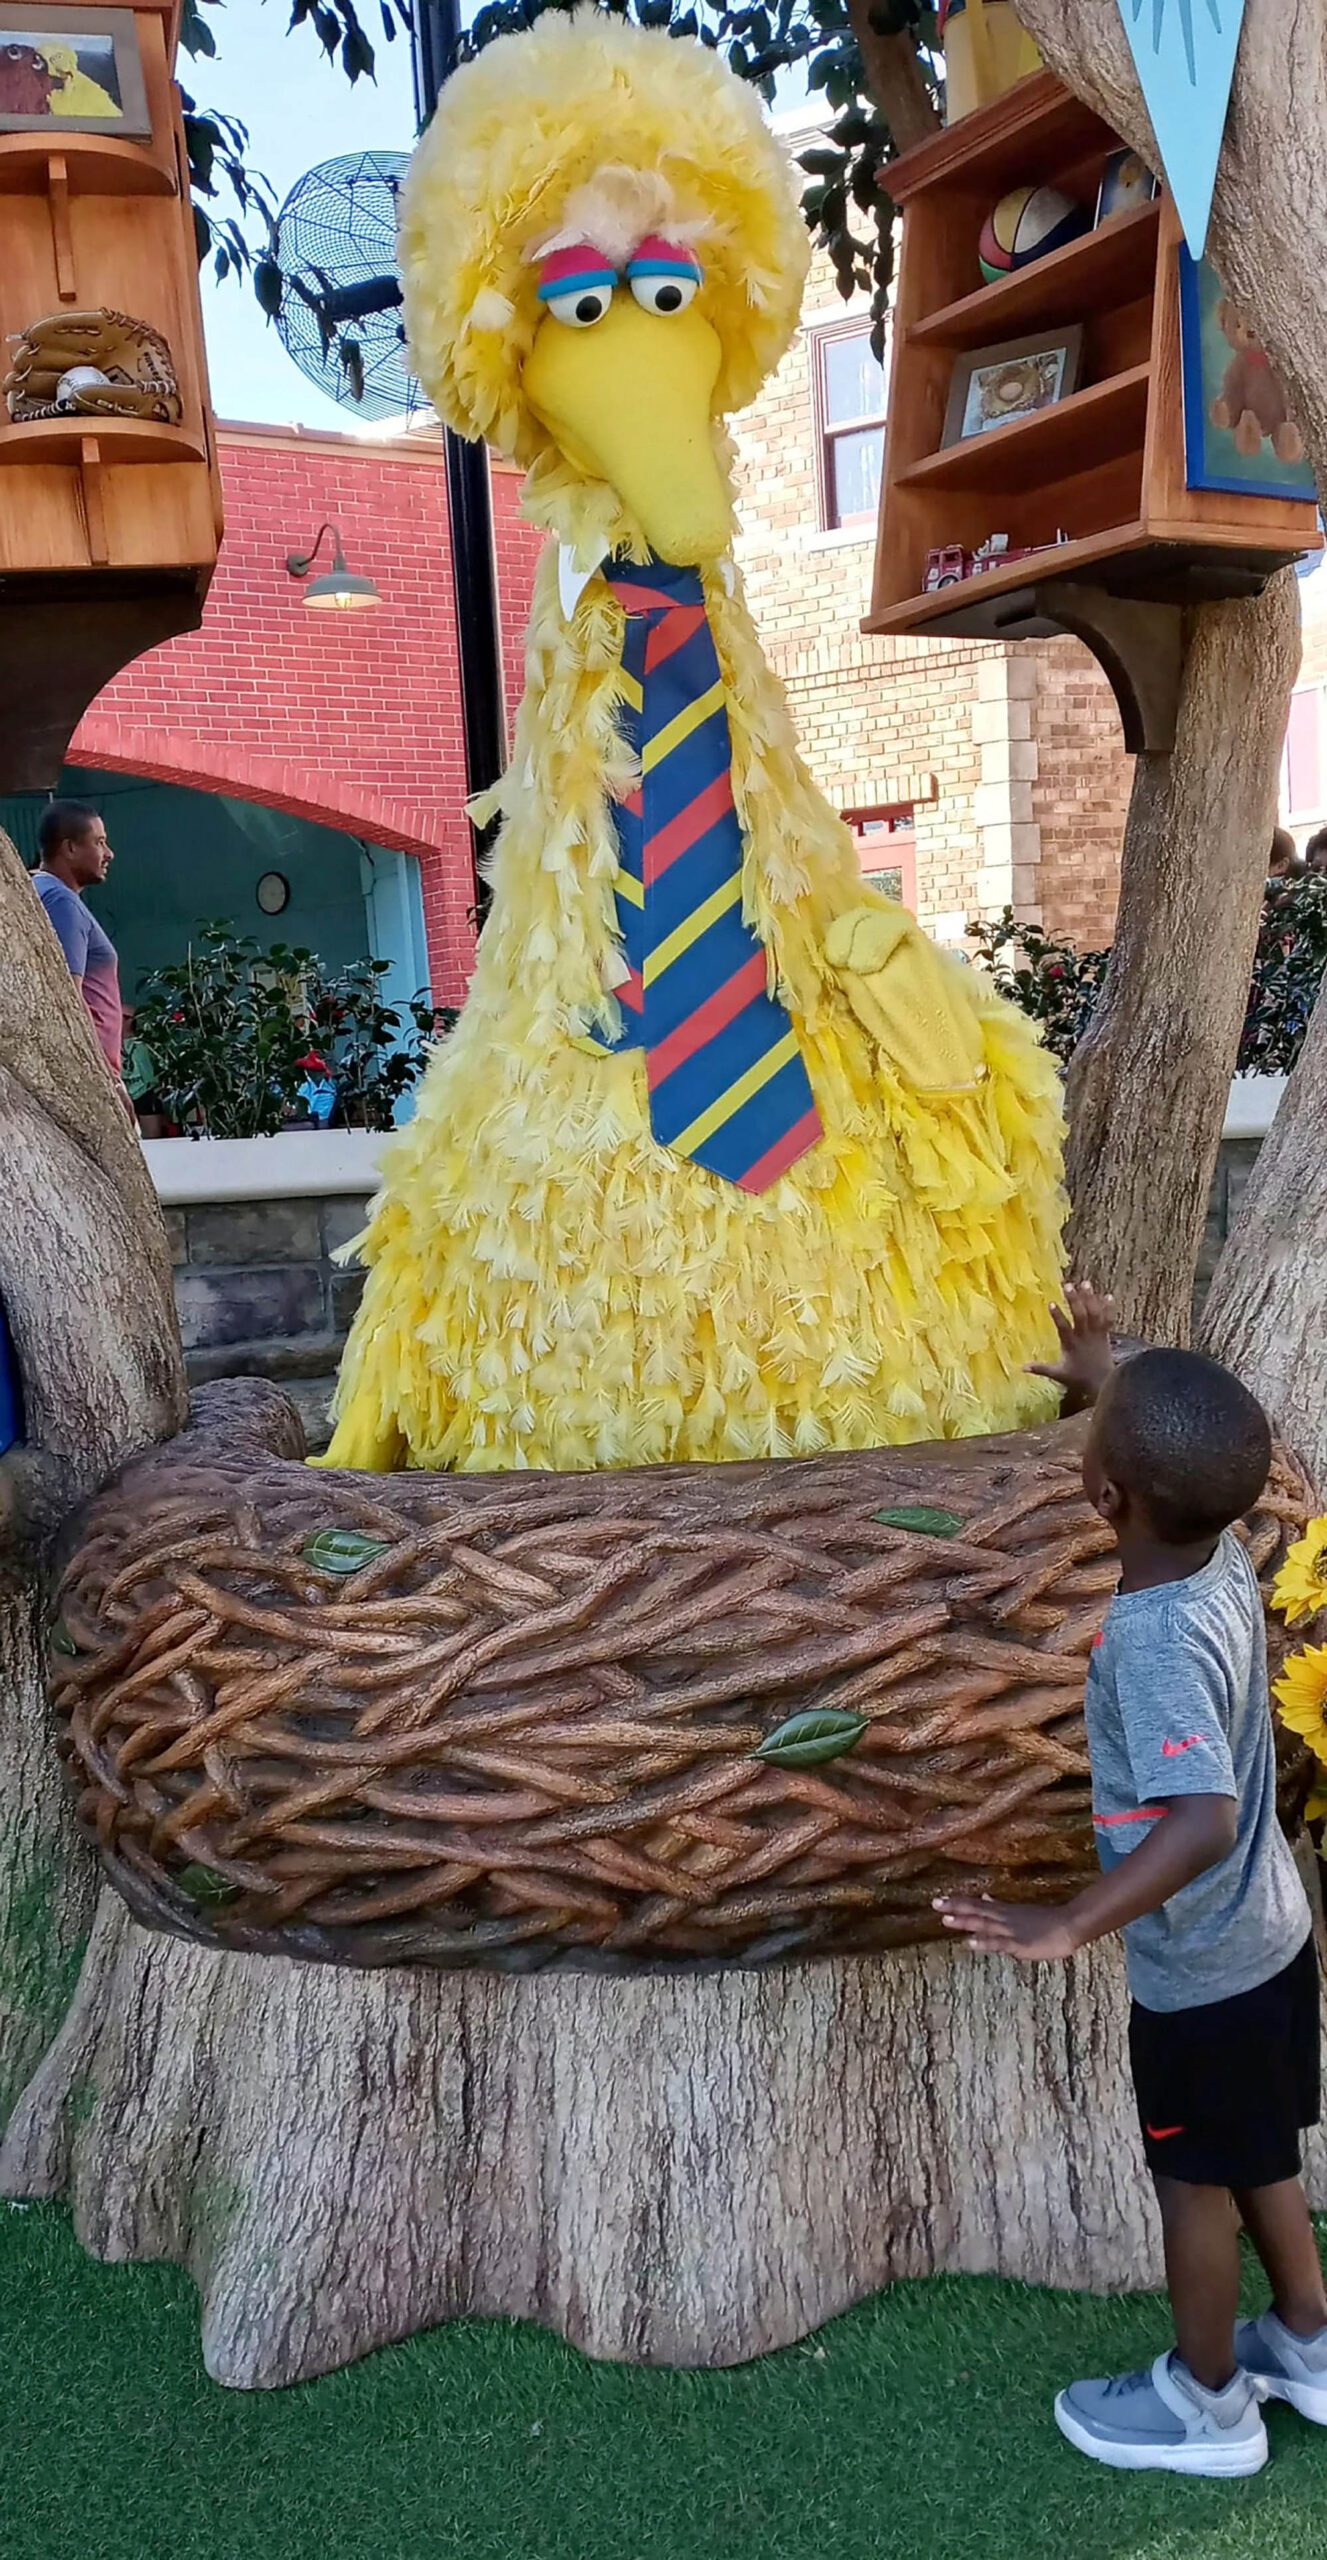 Parents say their four-year-old son was rejected by a character at Sesame Street Land - days after viral video of girls being waved away saw the park sued for $25 million over racism allegations. Undated photograph. (Kimberly Morris,SWNS/Zenger)